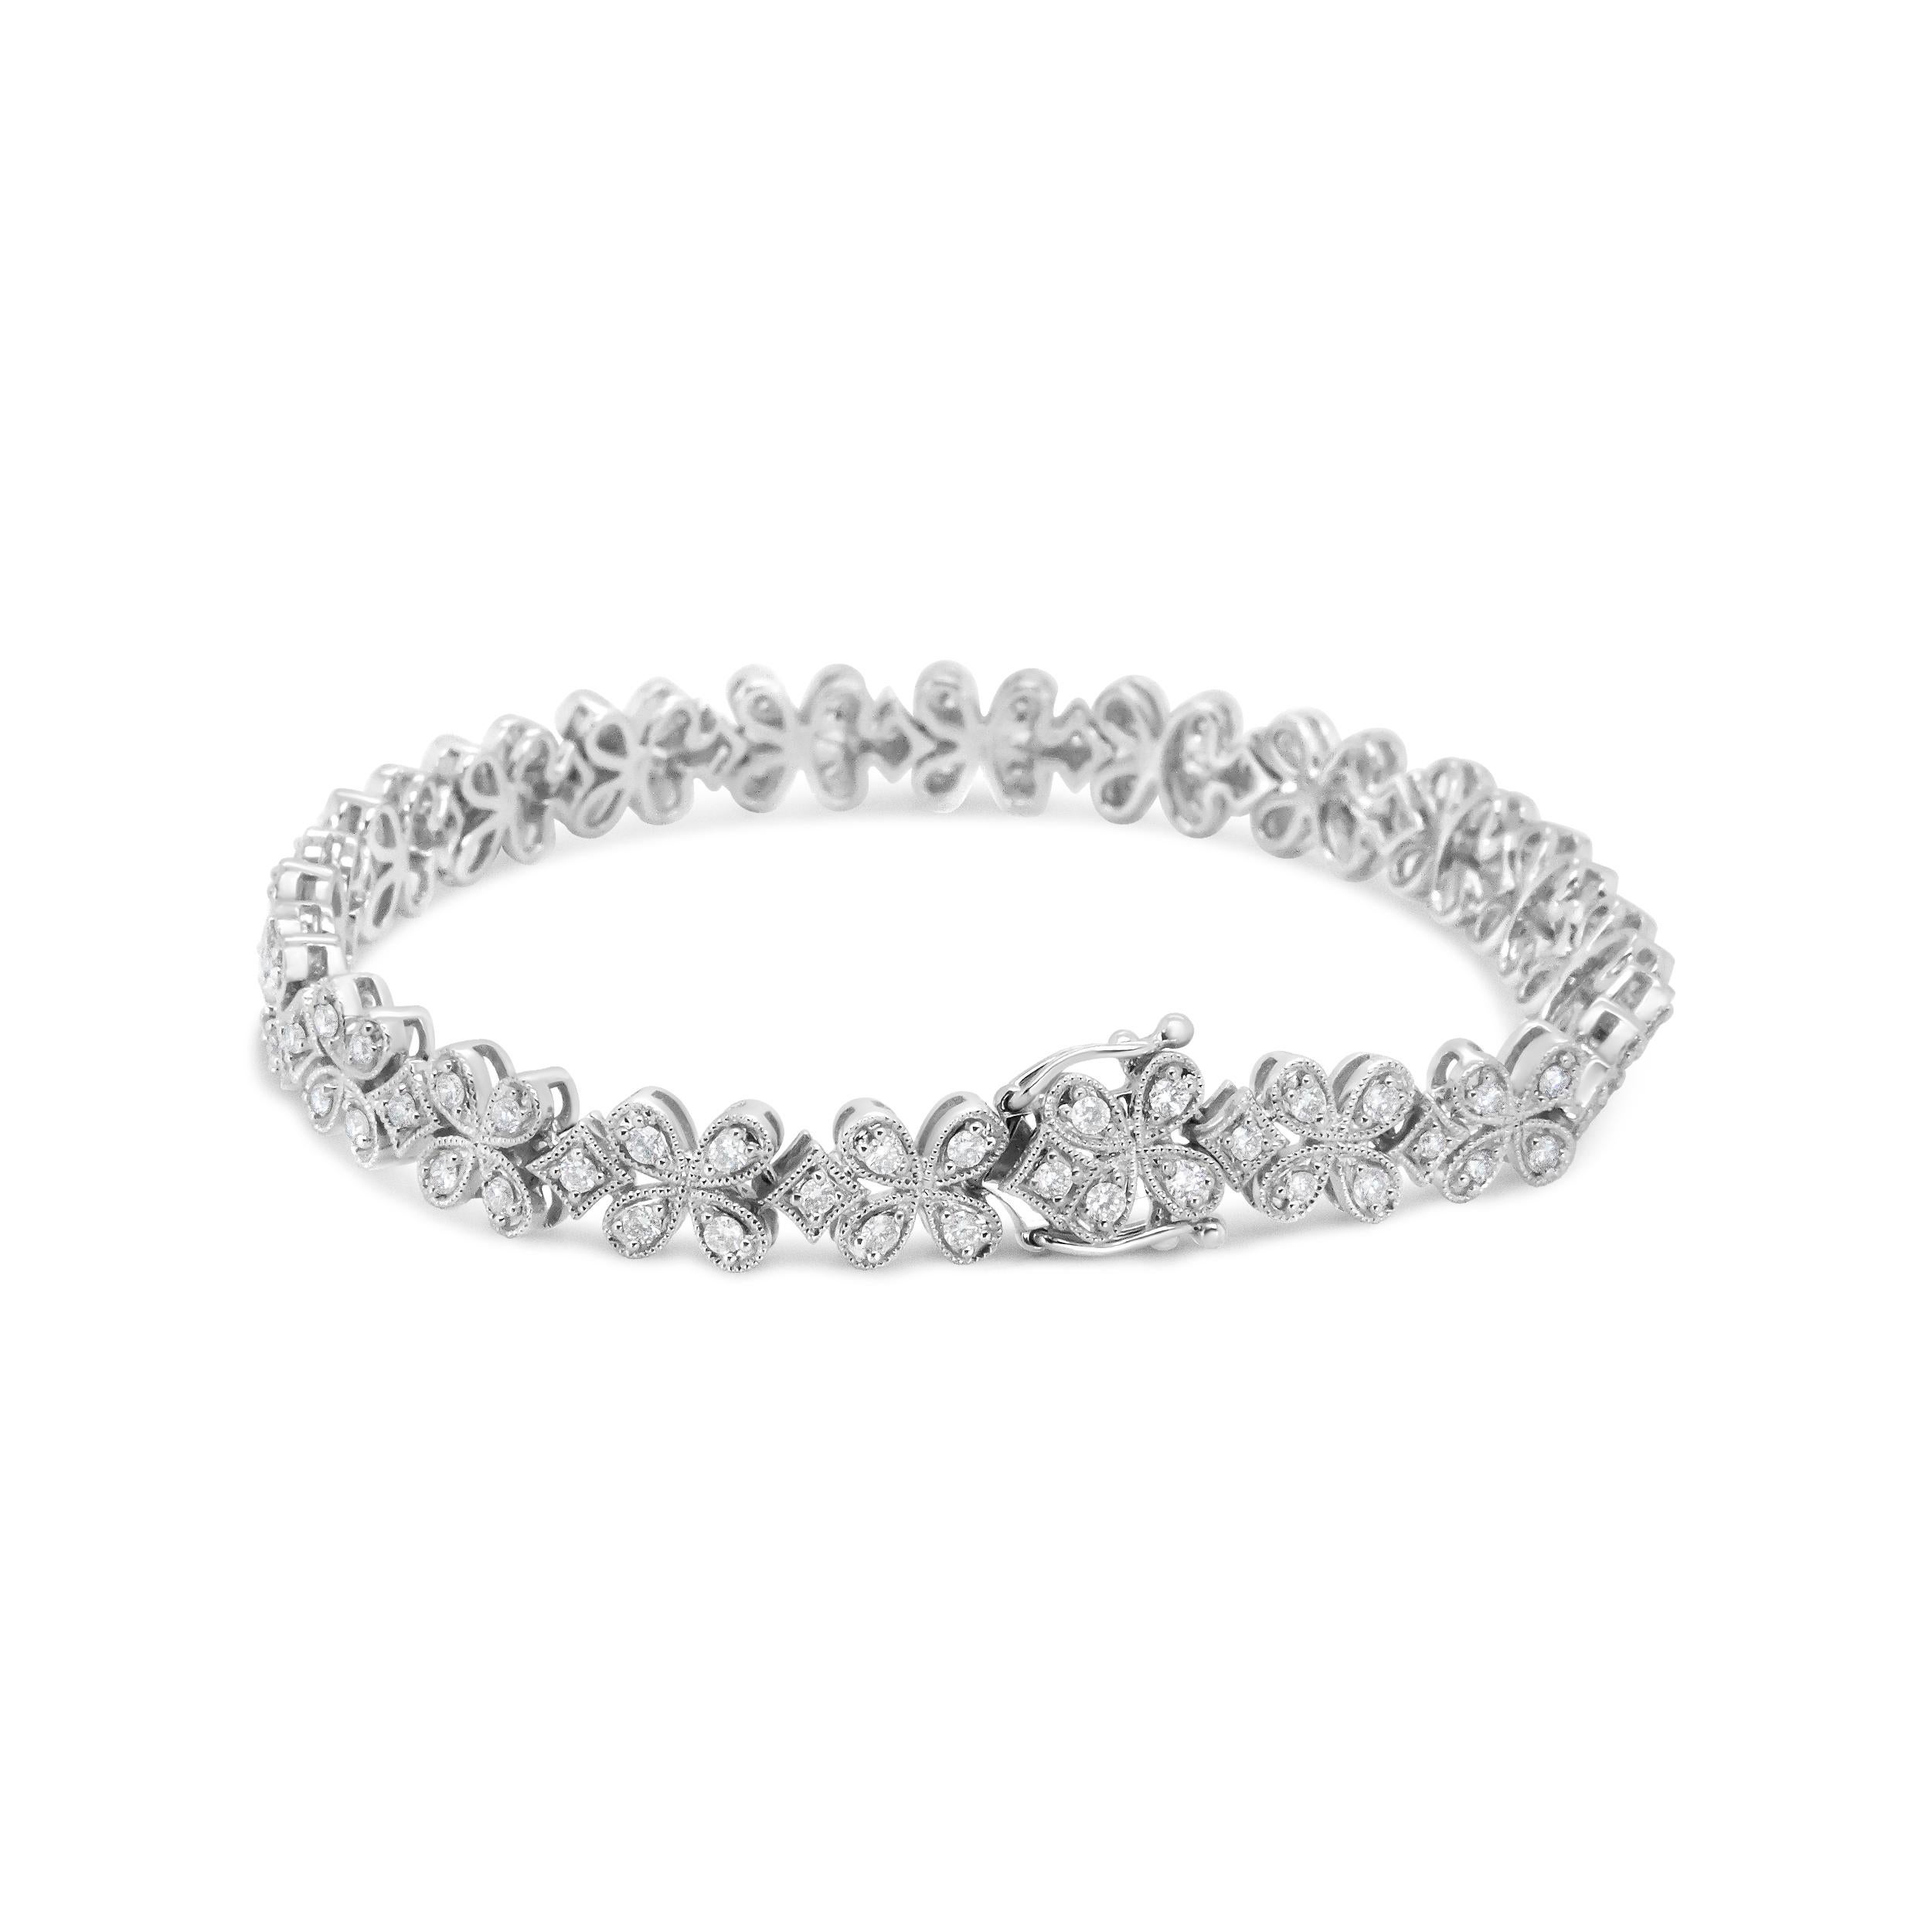 This show-stopping diamond link bracelet is a masterpiece of delicate beauty with floral inspiration that takes a modern twist with clean, contemporary angles and the romantic glamour of 100 diamonds. The round white diamonds sparkle from their